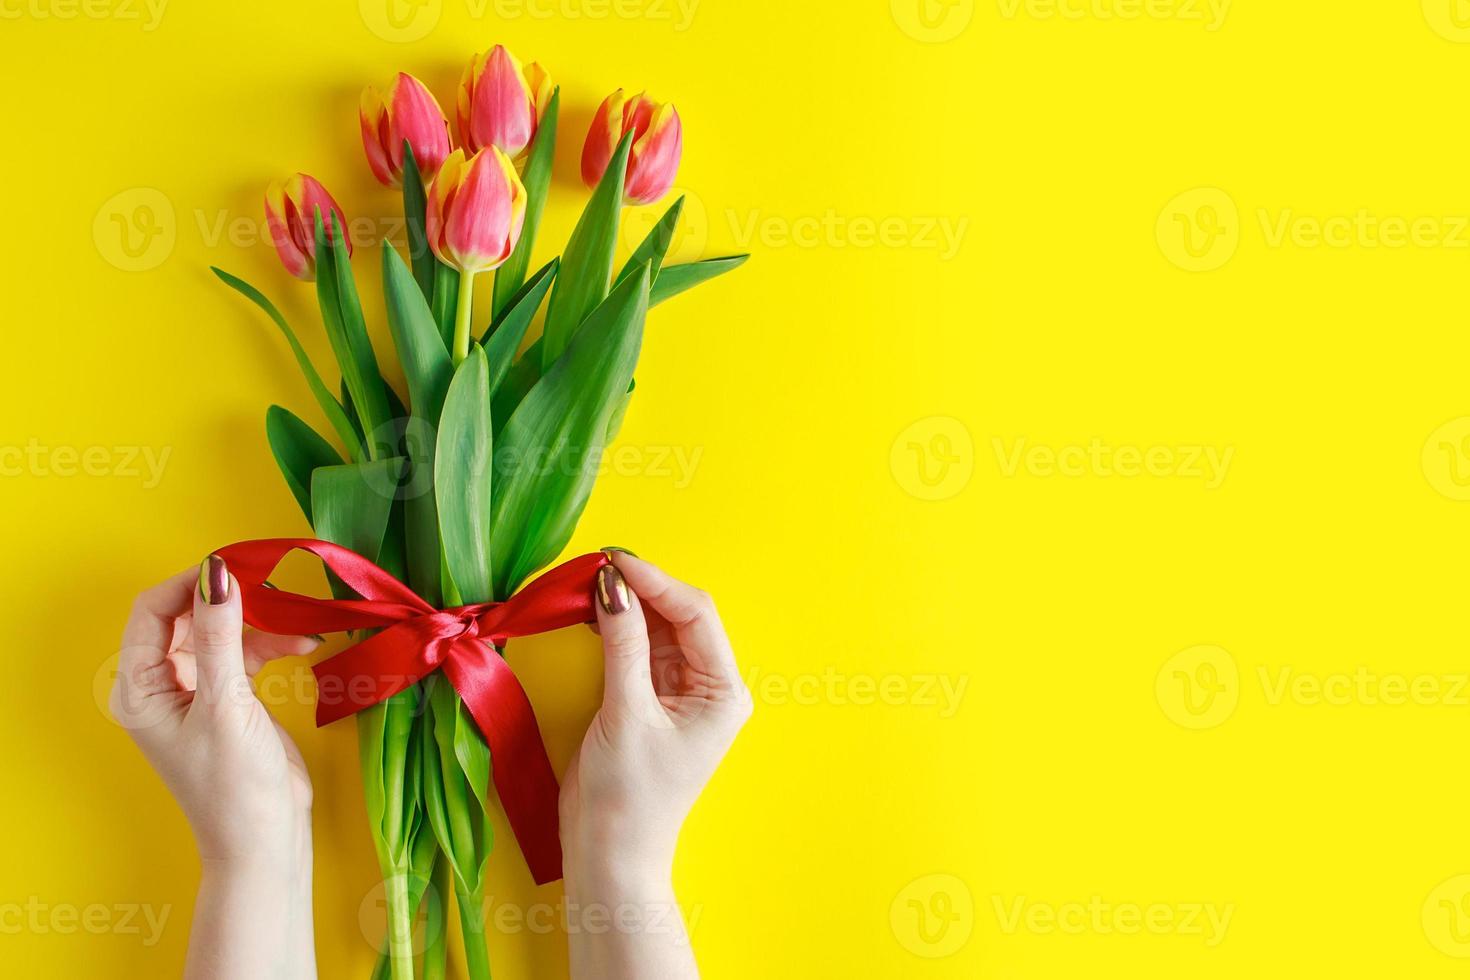 Woman ties bow on bouquet of tulips. Colorful fresh spring flowers on yellow background. photo